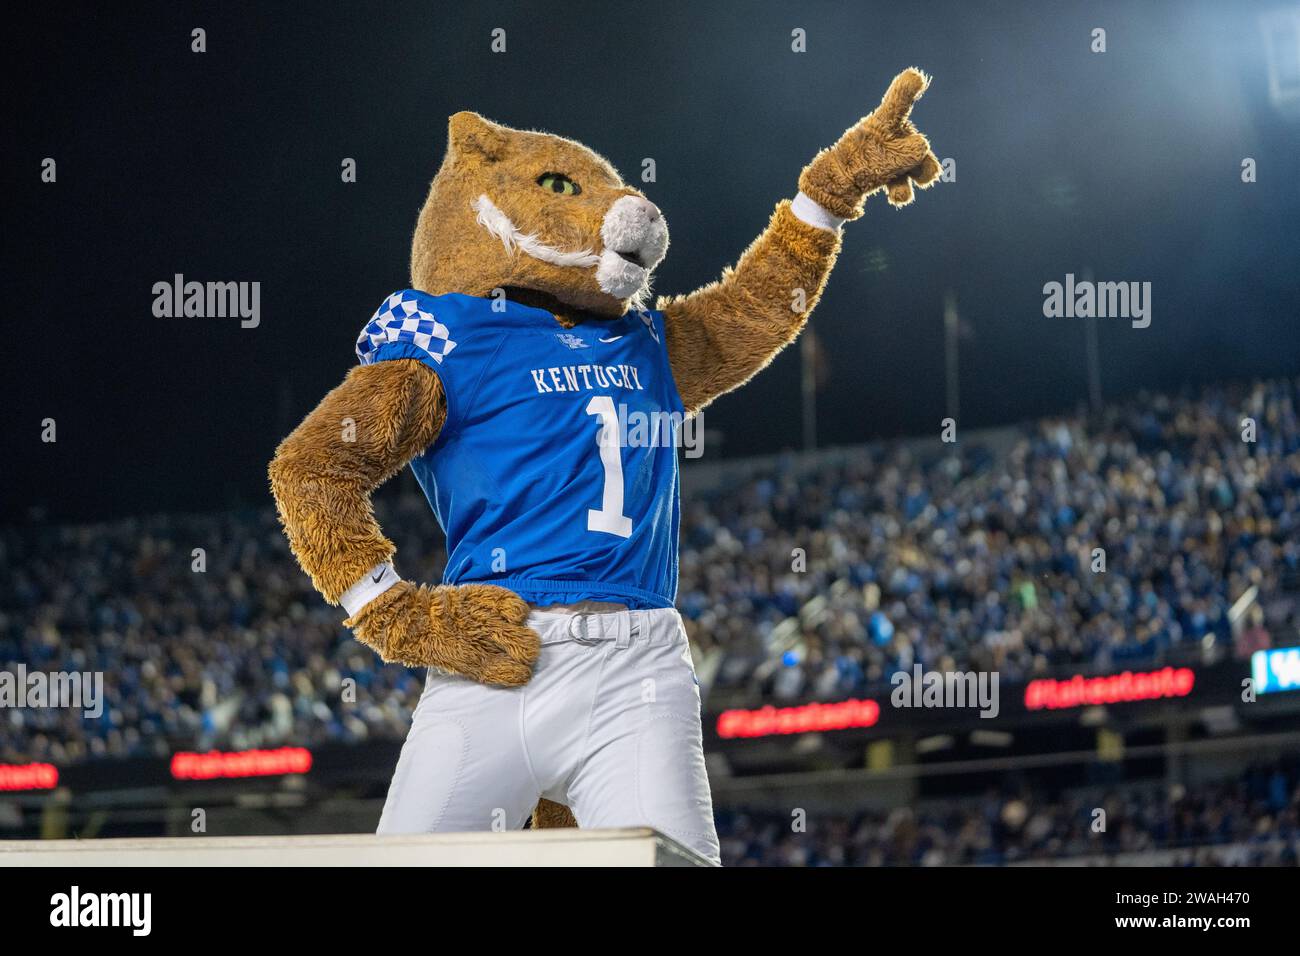 The Kentucky mascot during the NCAA college football game between  Louisville and Kentucky on Saturday November 25, 2017 at Commonwealth  Stadium in Lexington, KY. Jacob Kupferman/CSM Stock Photo - Alamy